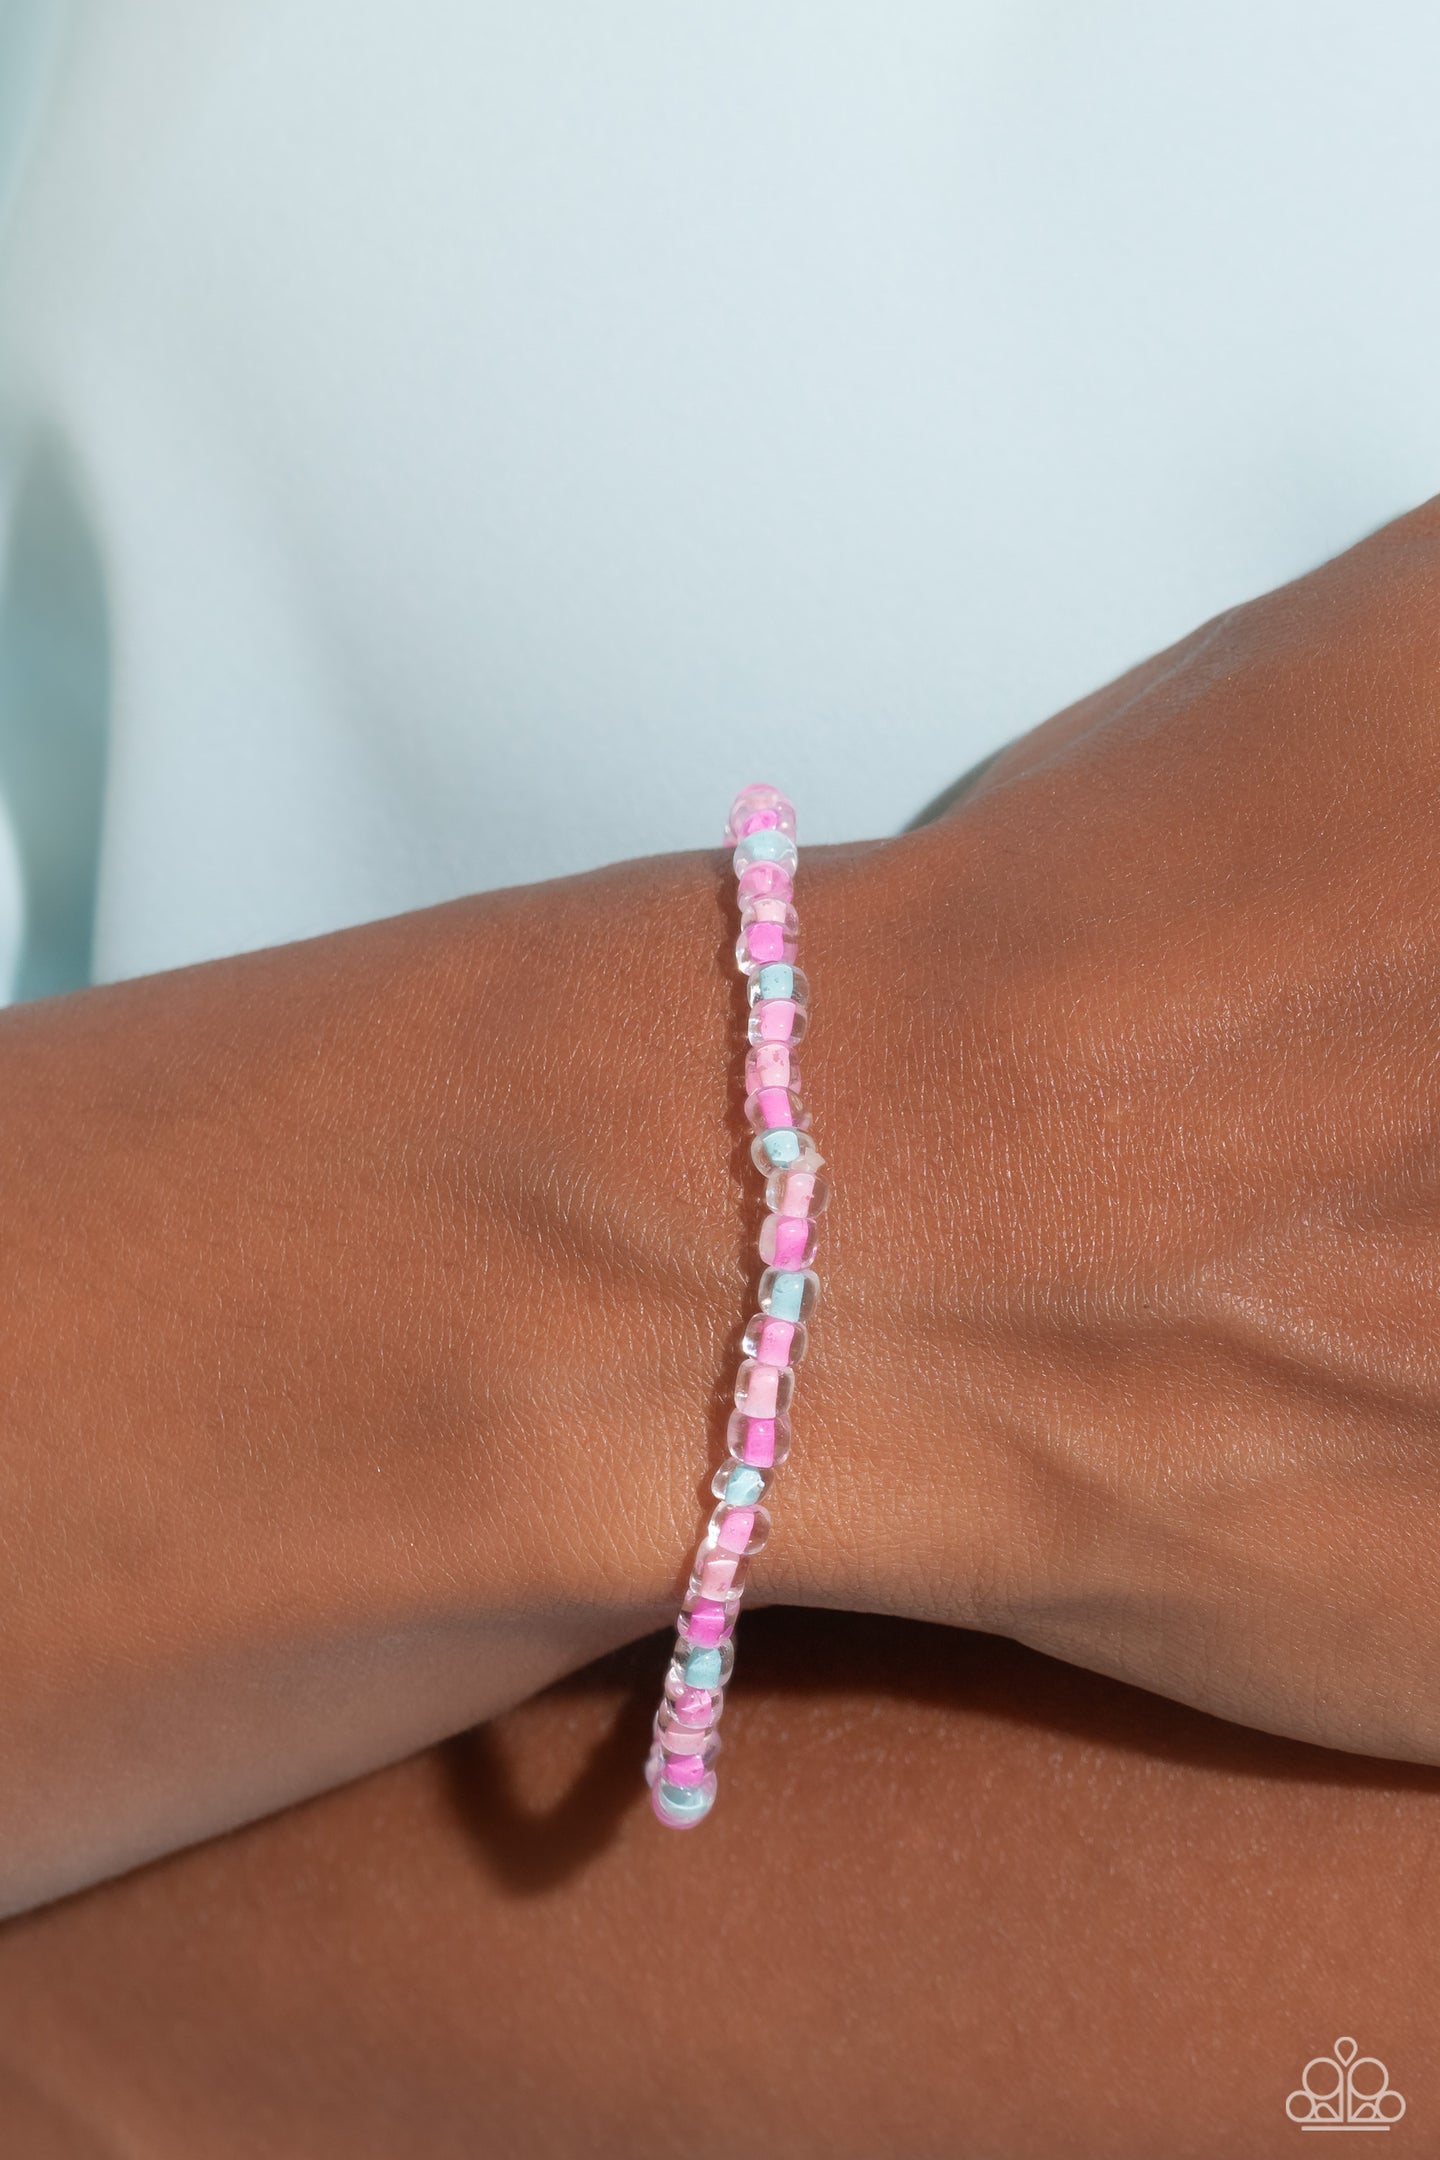 GLASS is in Session - Pink bracelet